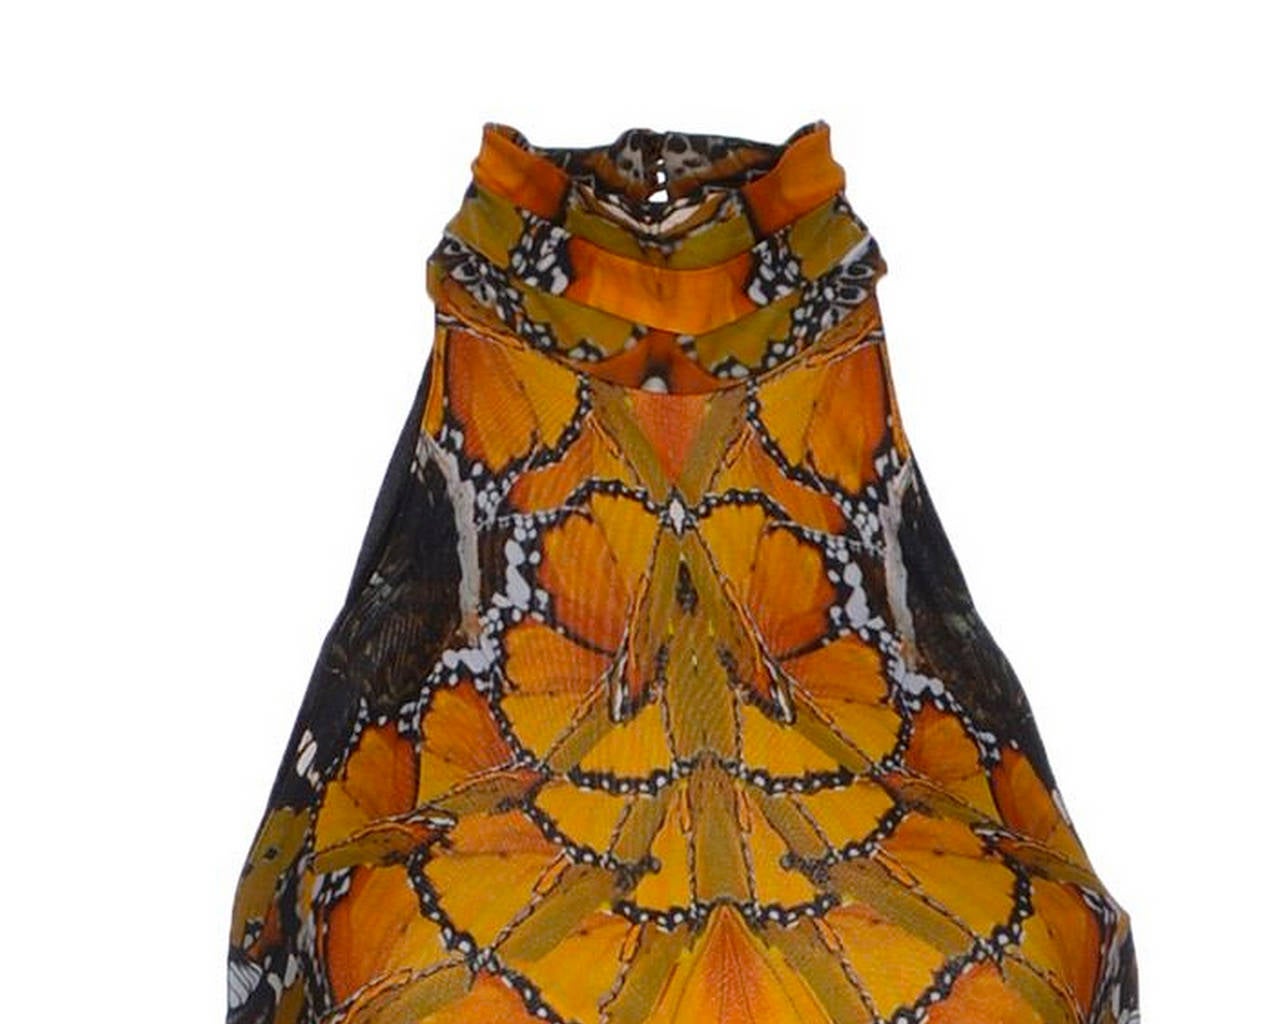 This Alexander McQueen dress features an intricate monarch butterfly print and halter neck from the Spring/Summer 2011 Alexander McQueen Collection. This same print was also worn by Effie from the film 